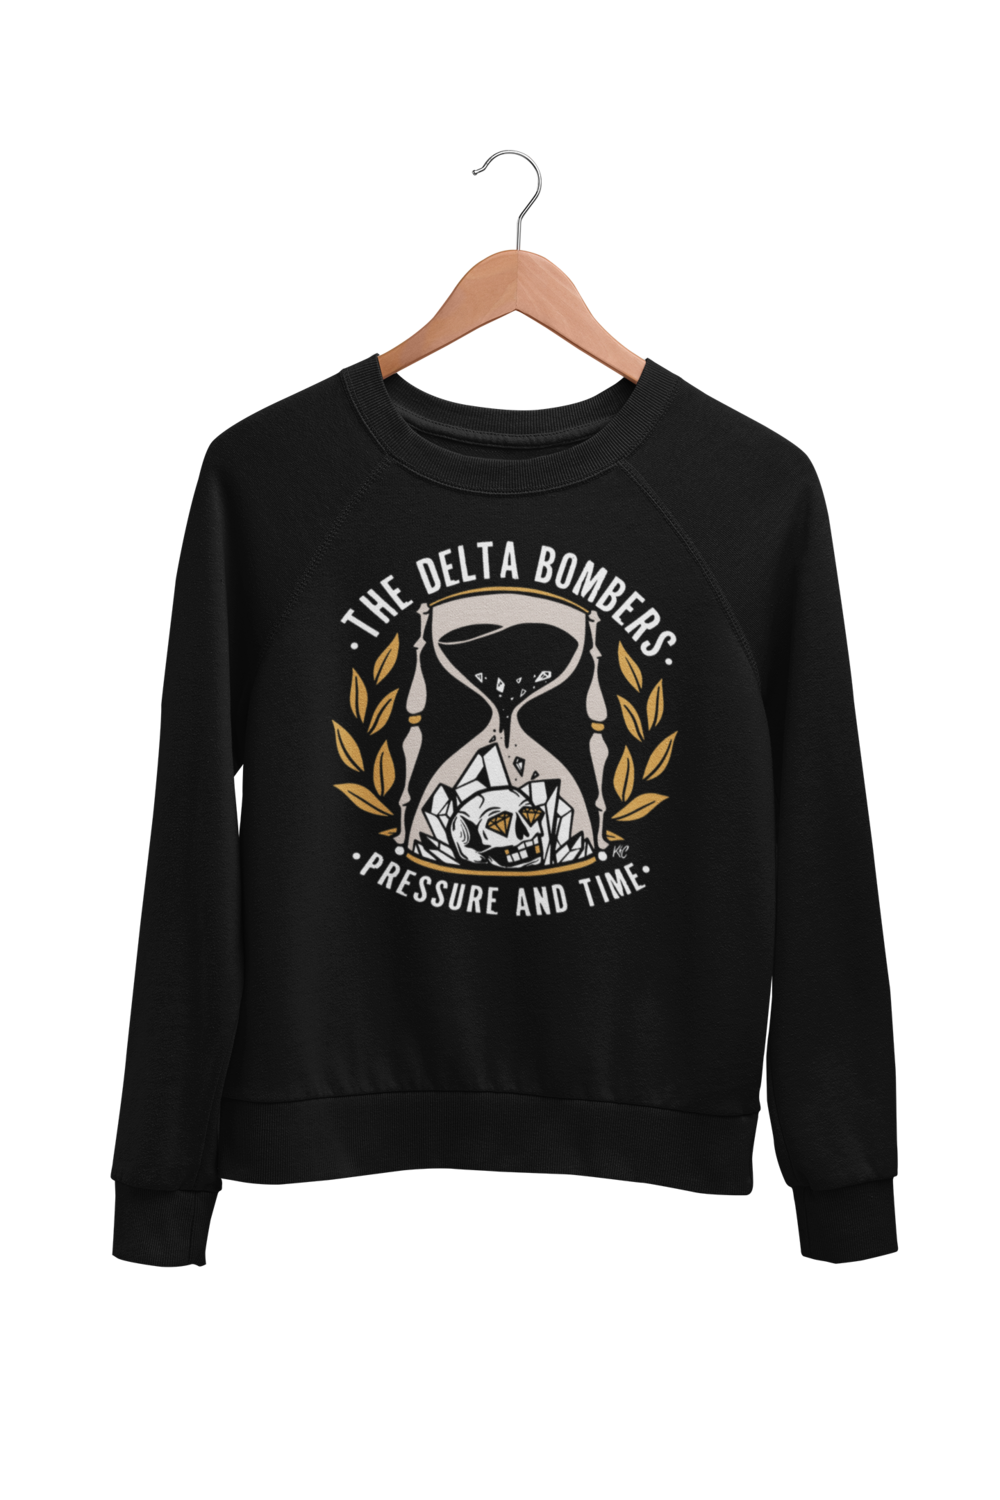 THE DELTA BOMBERS "Pressure and time" SWEATSHIRT